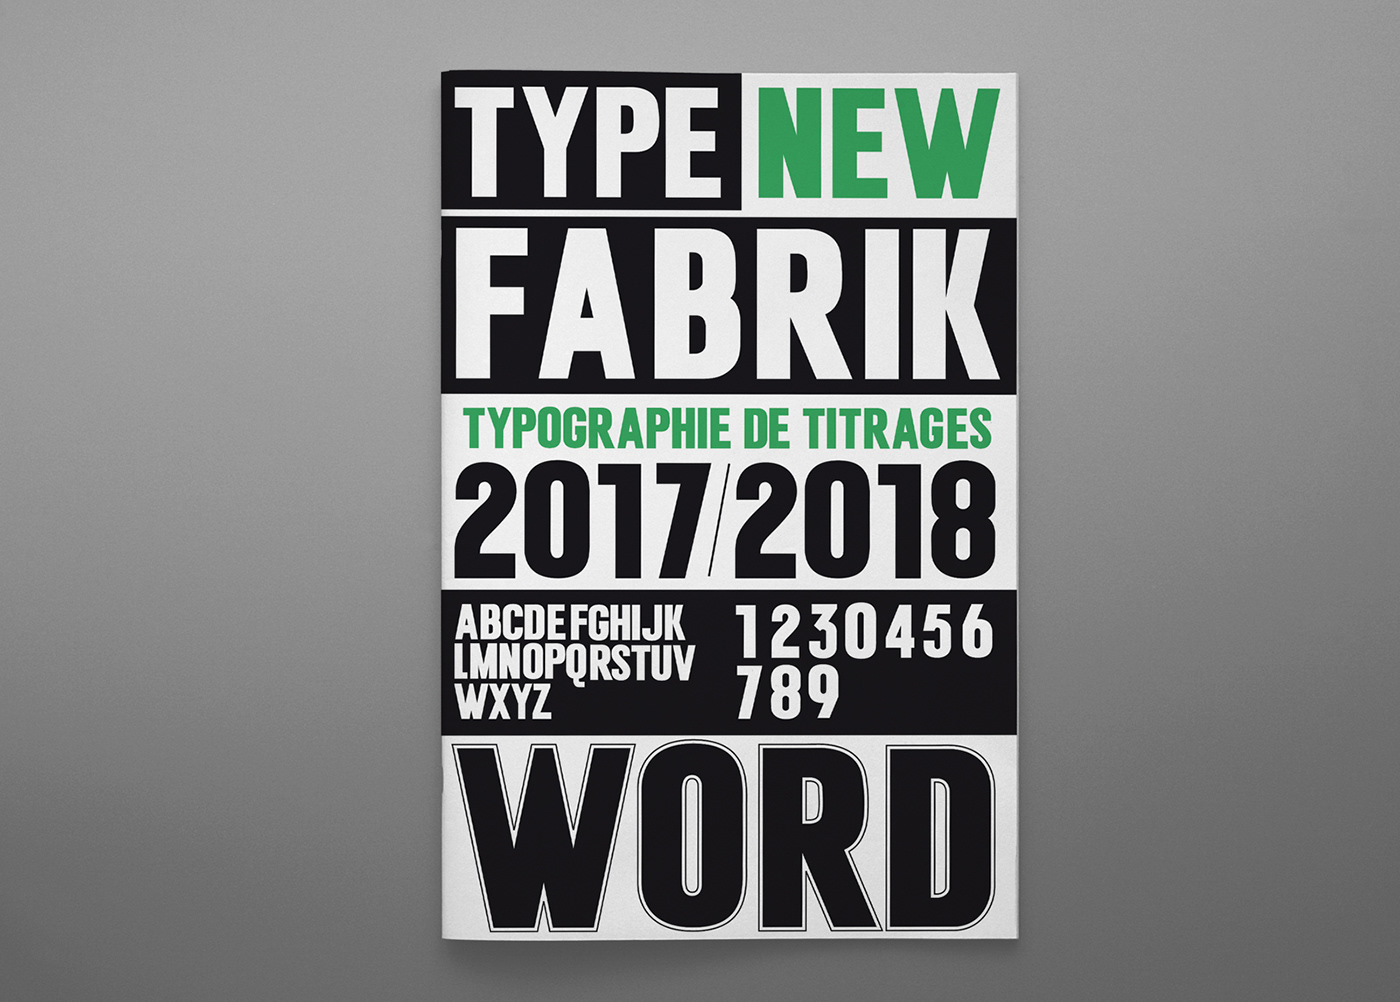 Poster composed of lettering and typefaces